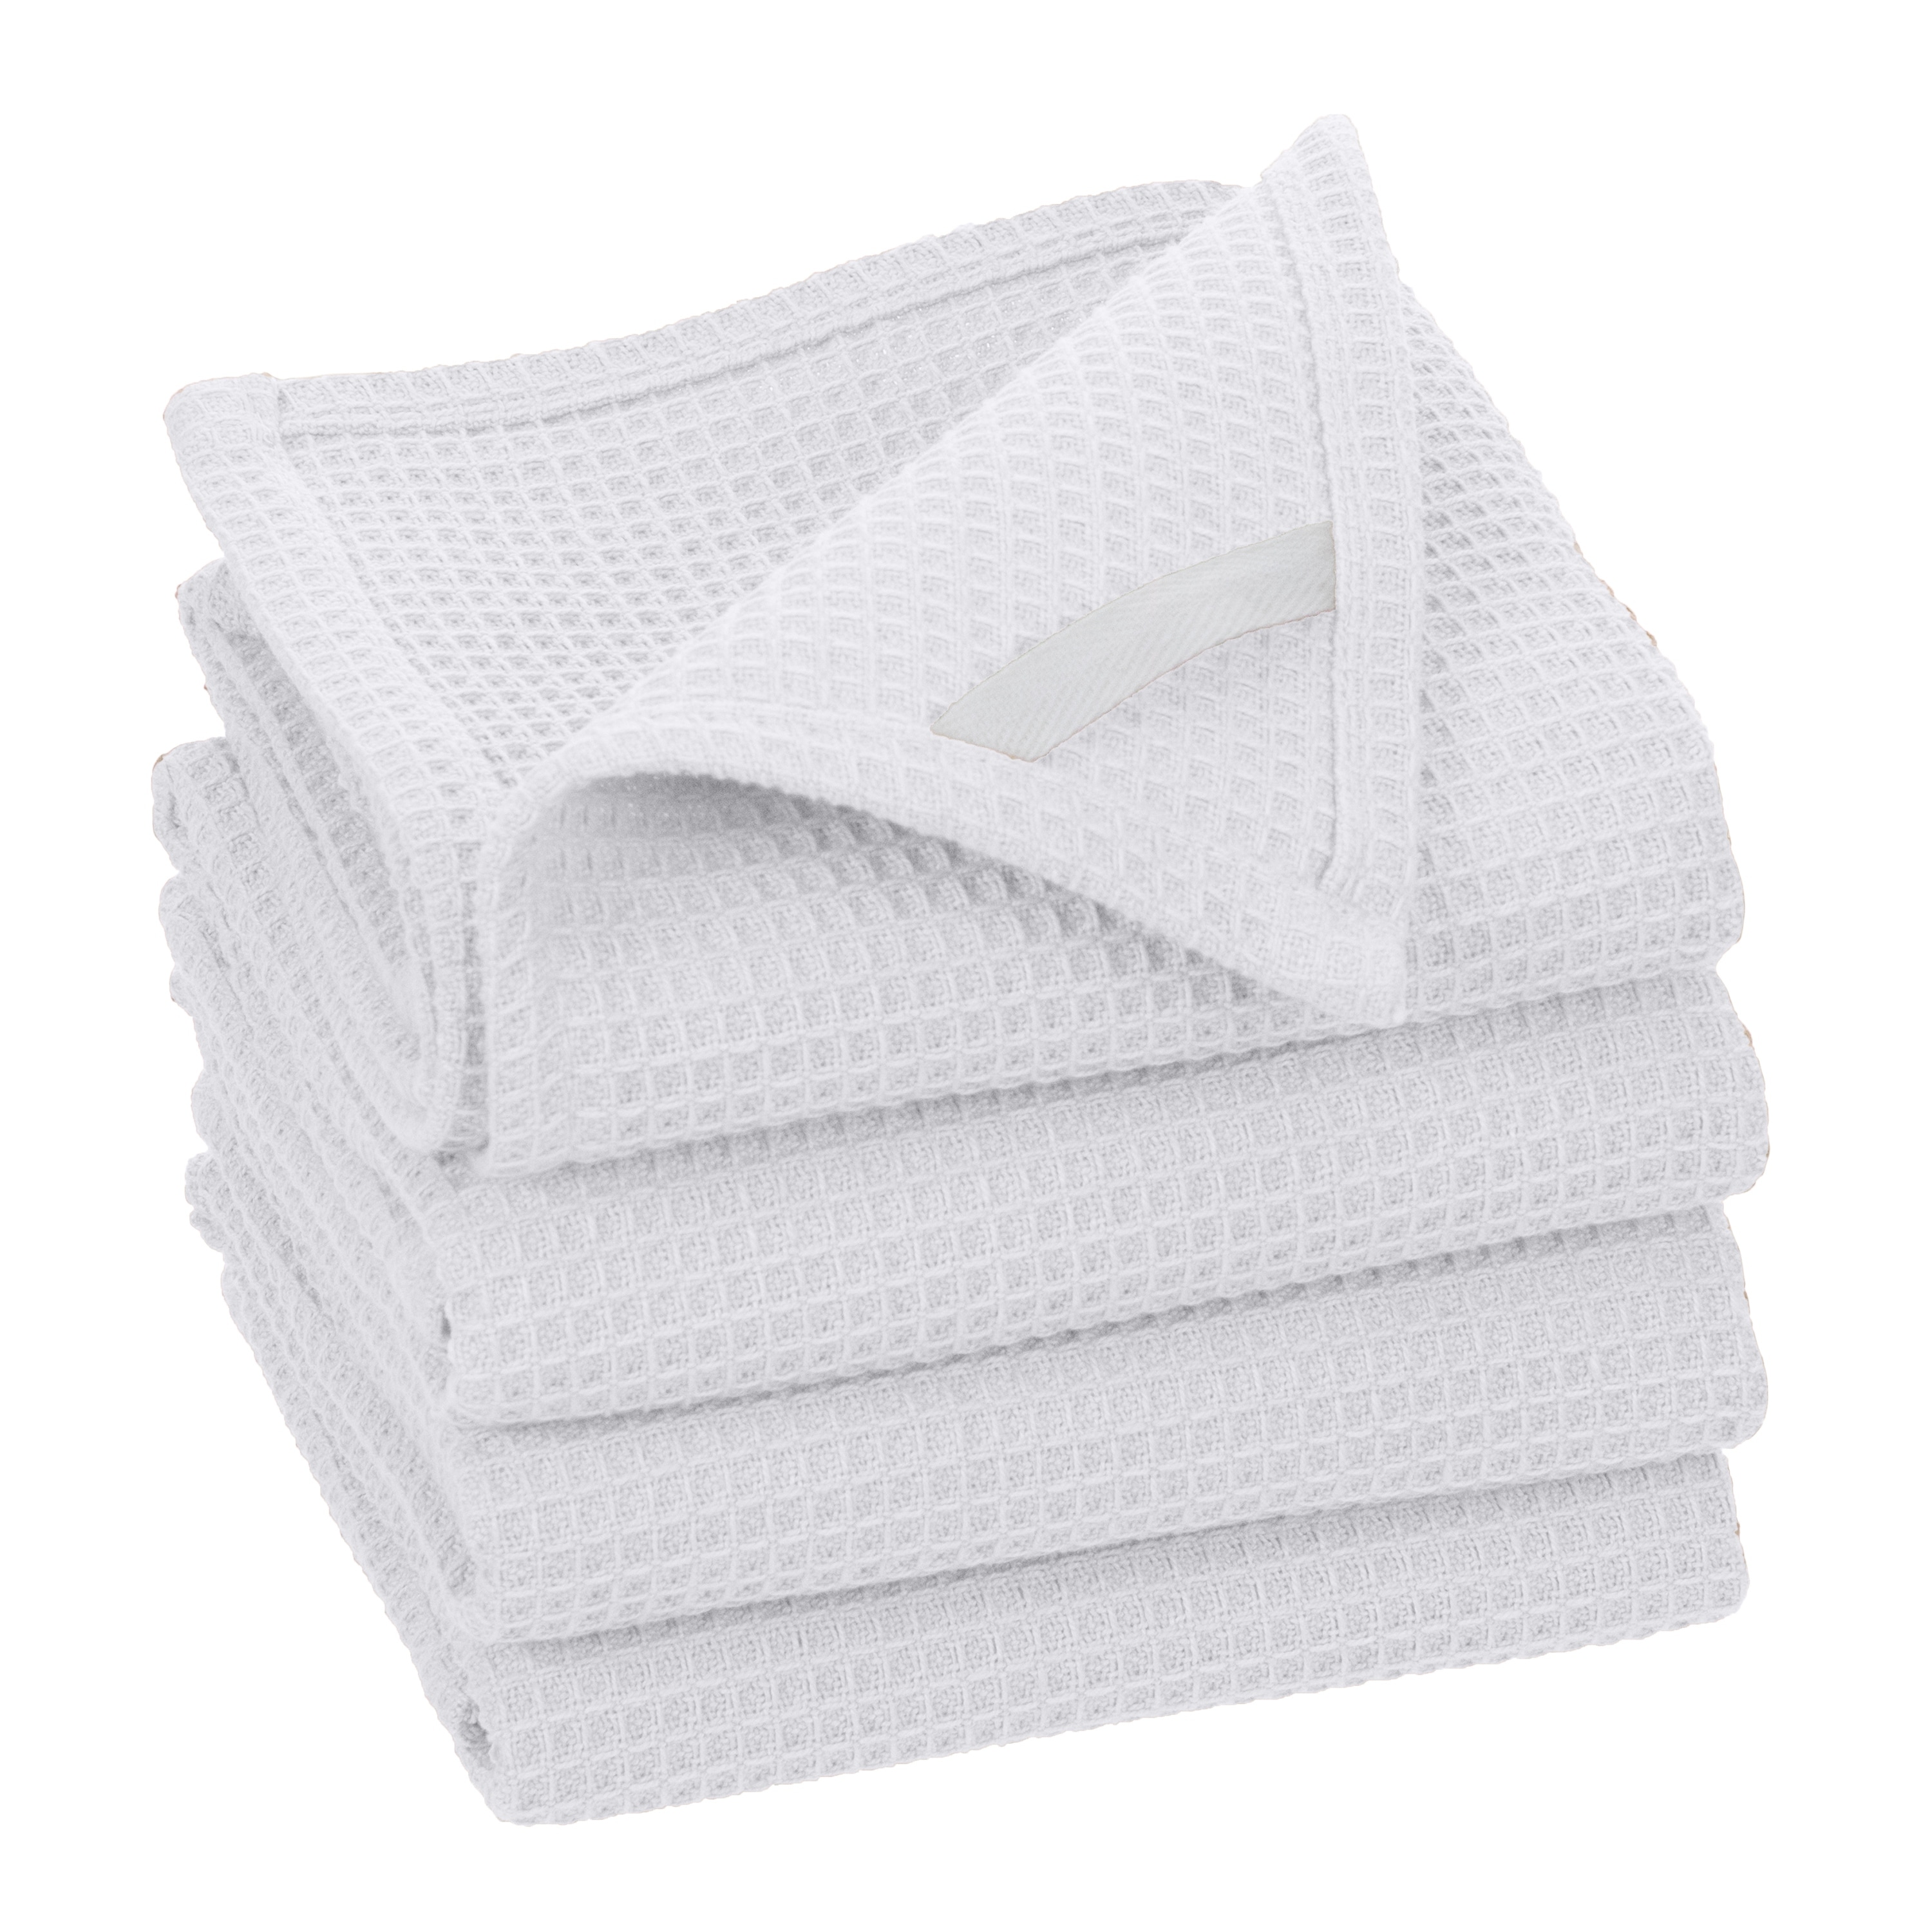 https://ak1.ostkcdn.com/images/products/is/images/direct/66bccd9bea6dc06f0650d8de53e4aca965f66b64/Fabstyles-Broadway-Waffle-Cotton-Kitchen-Towels.jpg